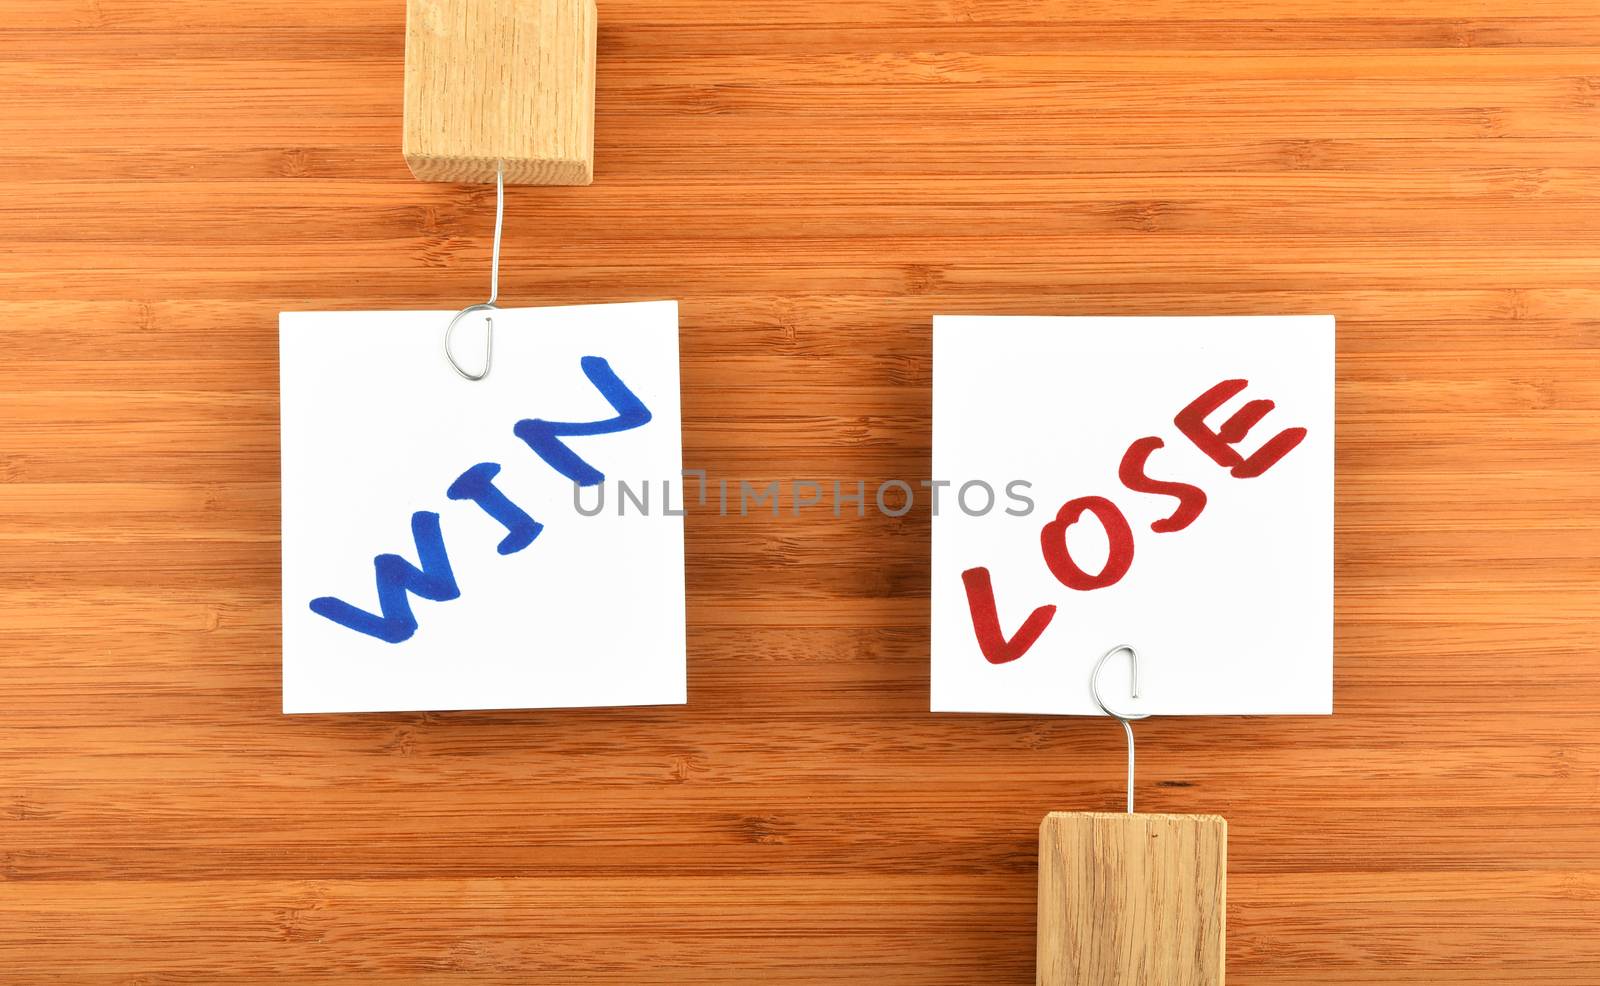 Win lose, two white paper notes with marker hand written words, wooden holders in different directions on bamboo wooden background for presentation